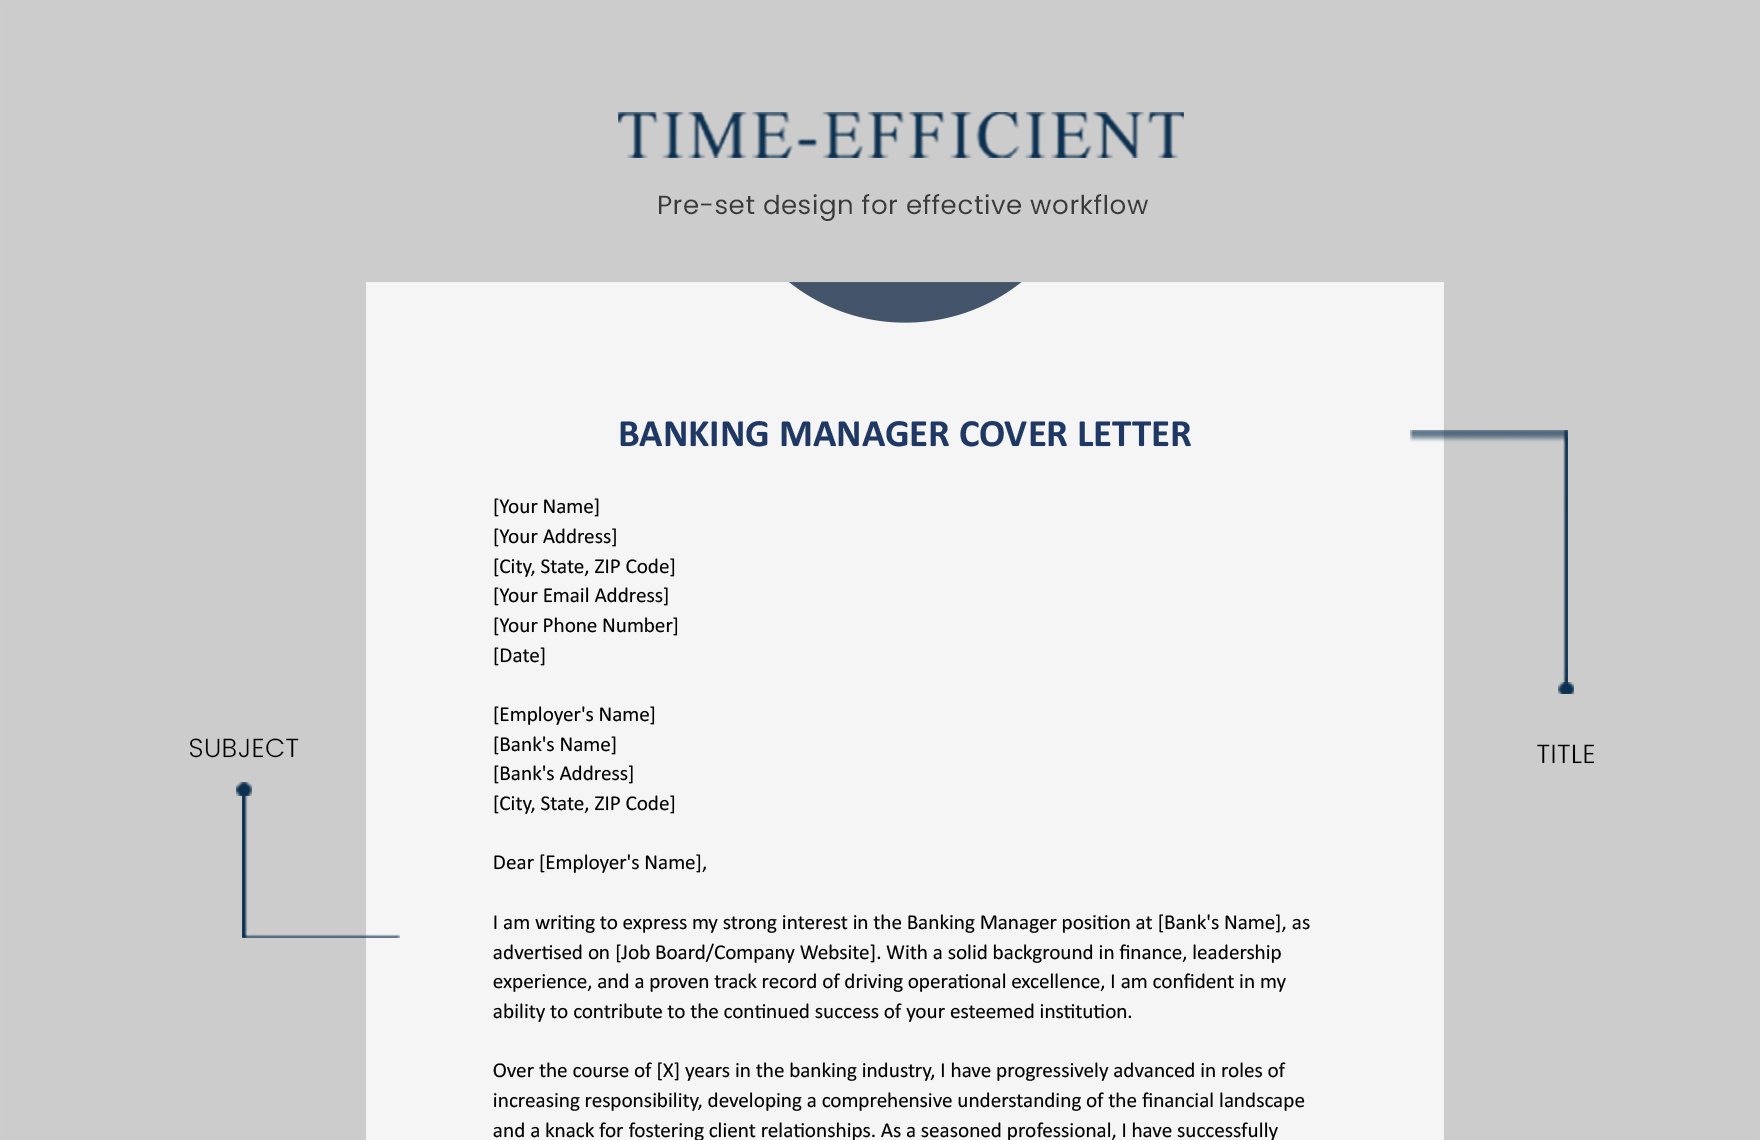 Banking Manager Cover Letter